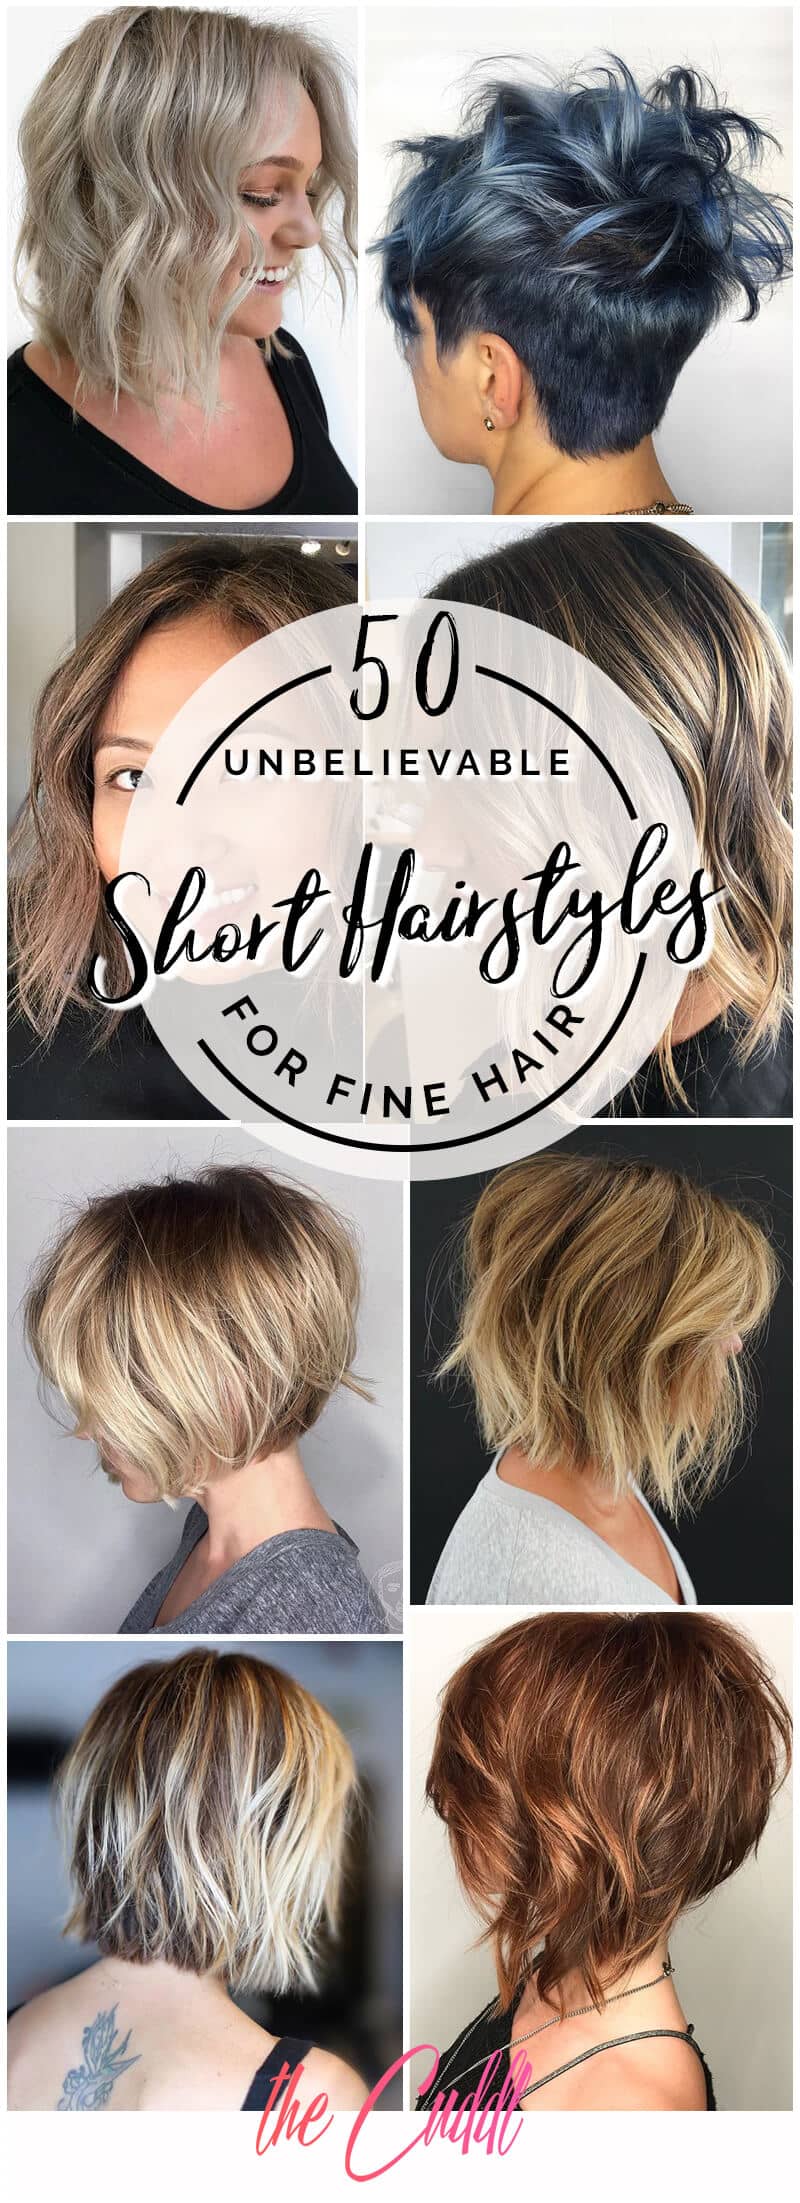 50 Quick and Fresh Short Hairstyles for Fine Hair that Rock the World